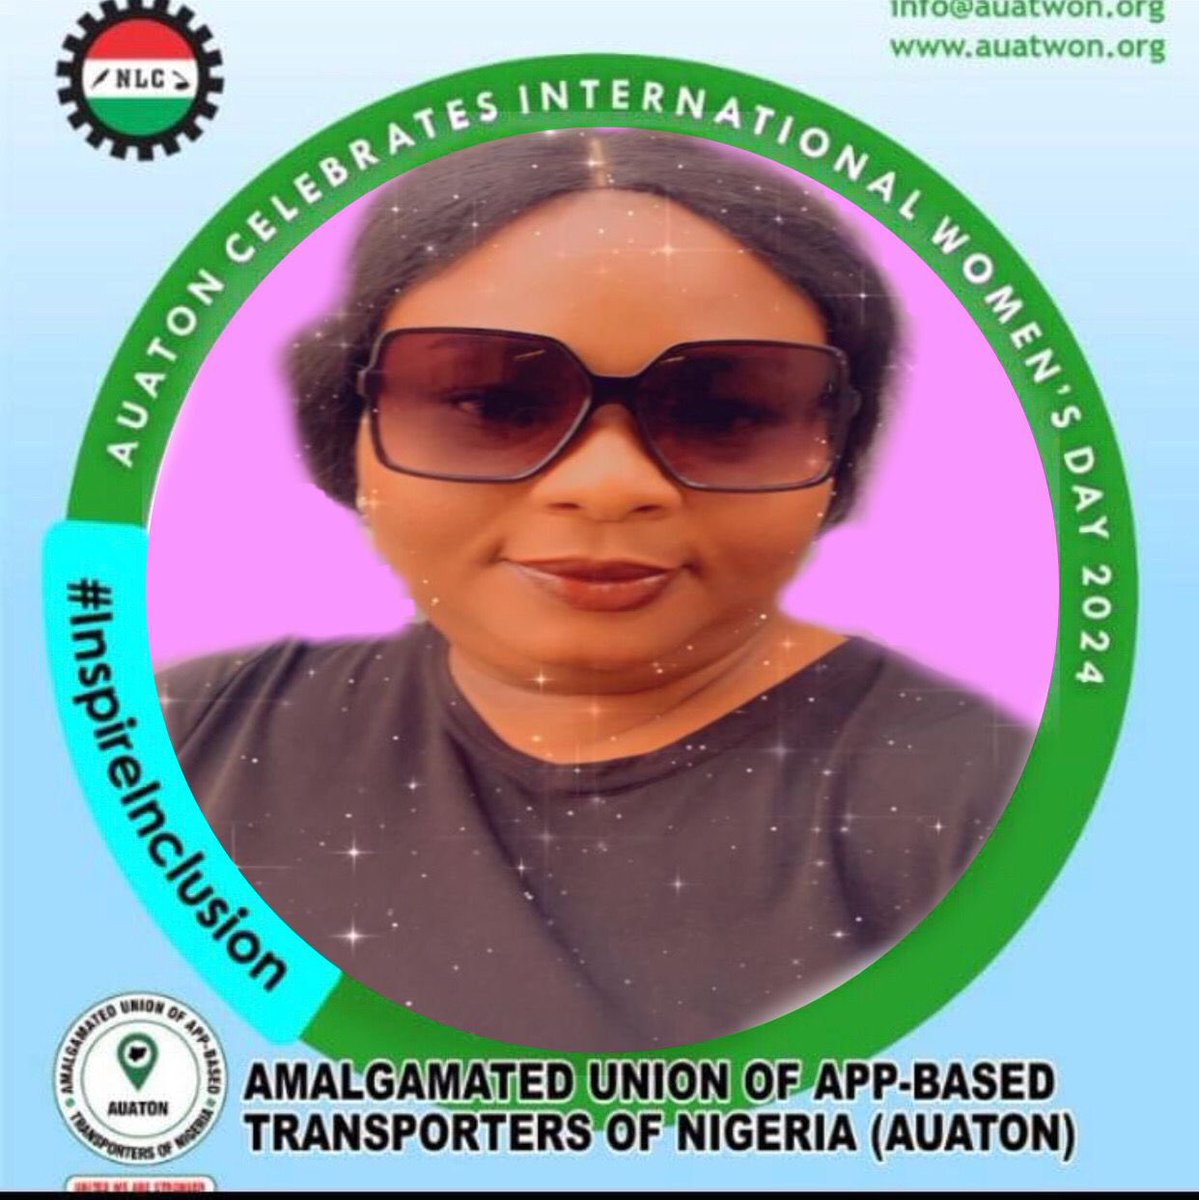 @AUATONofficial May this day bring strength to us all and revive our will to shine and move on! 
Happy international women’s day to us all! #IWD2024
#Internationalwomen'sday2024
#Securityforwomen
#Genderequality
#Auatonwomen
Comrade Joan
Treasurer Auaton Lagos.
No woman,No nation